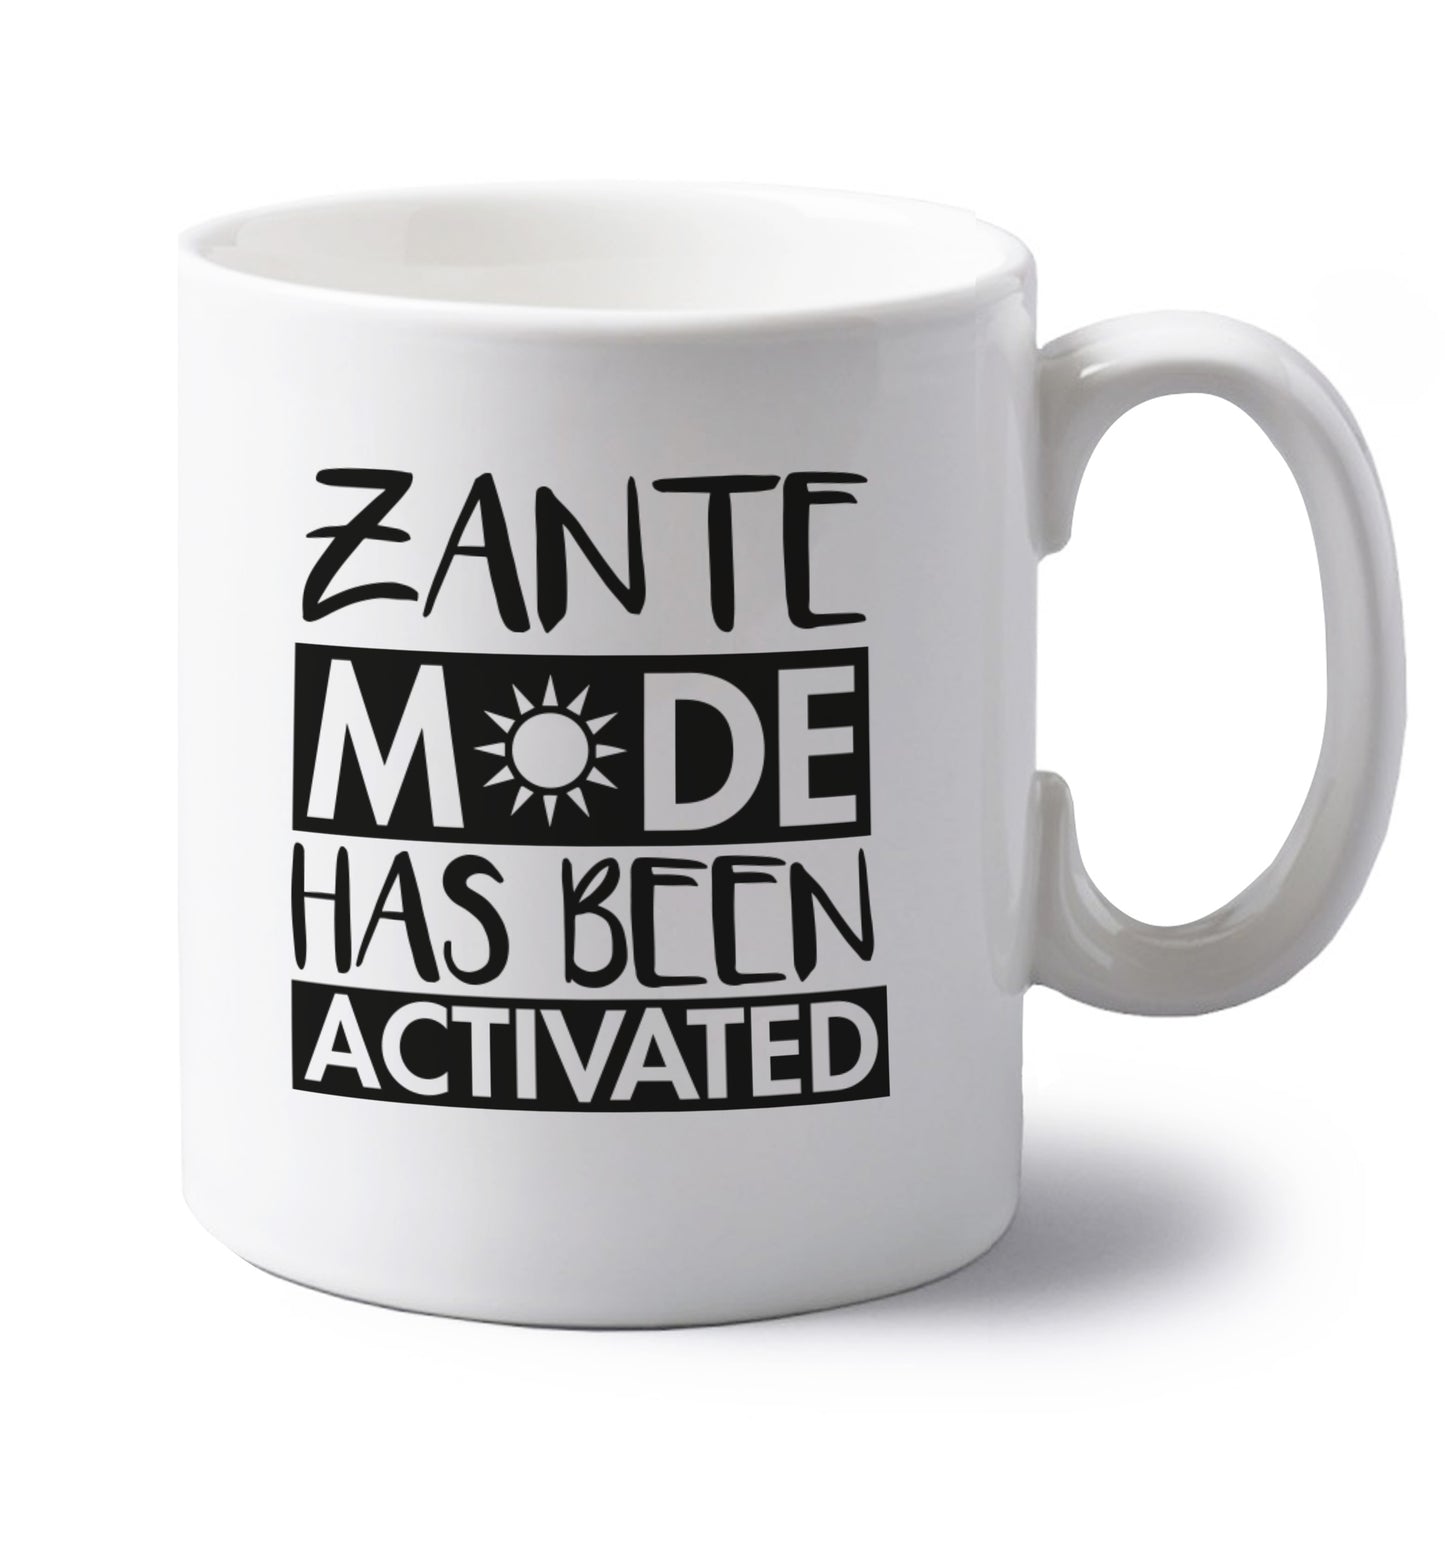 Zante mode has been activated left handed white ceramic mug 